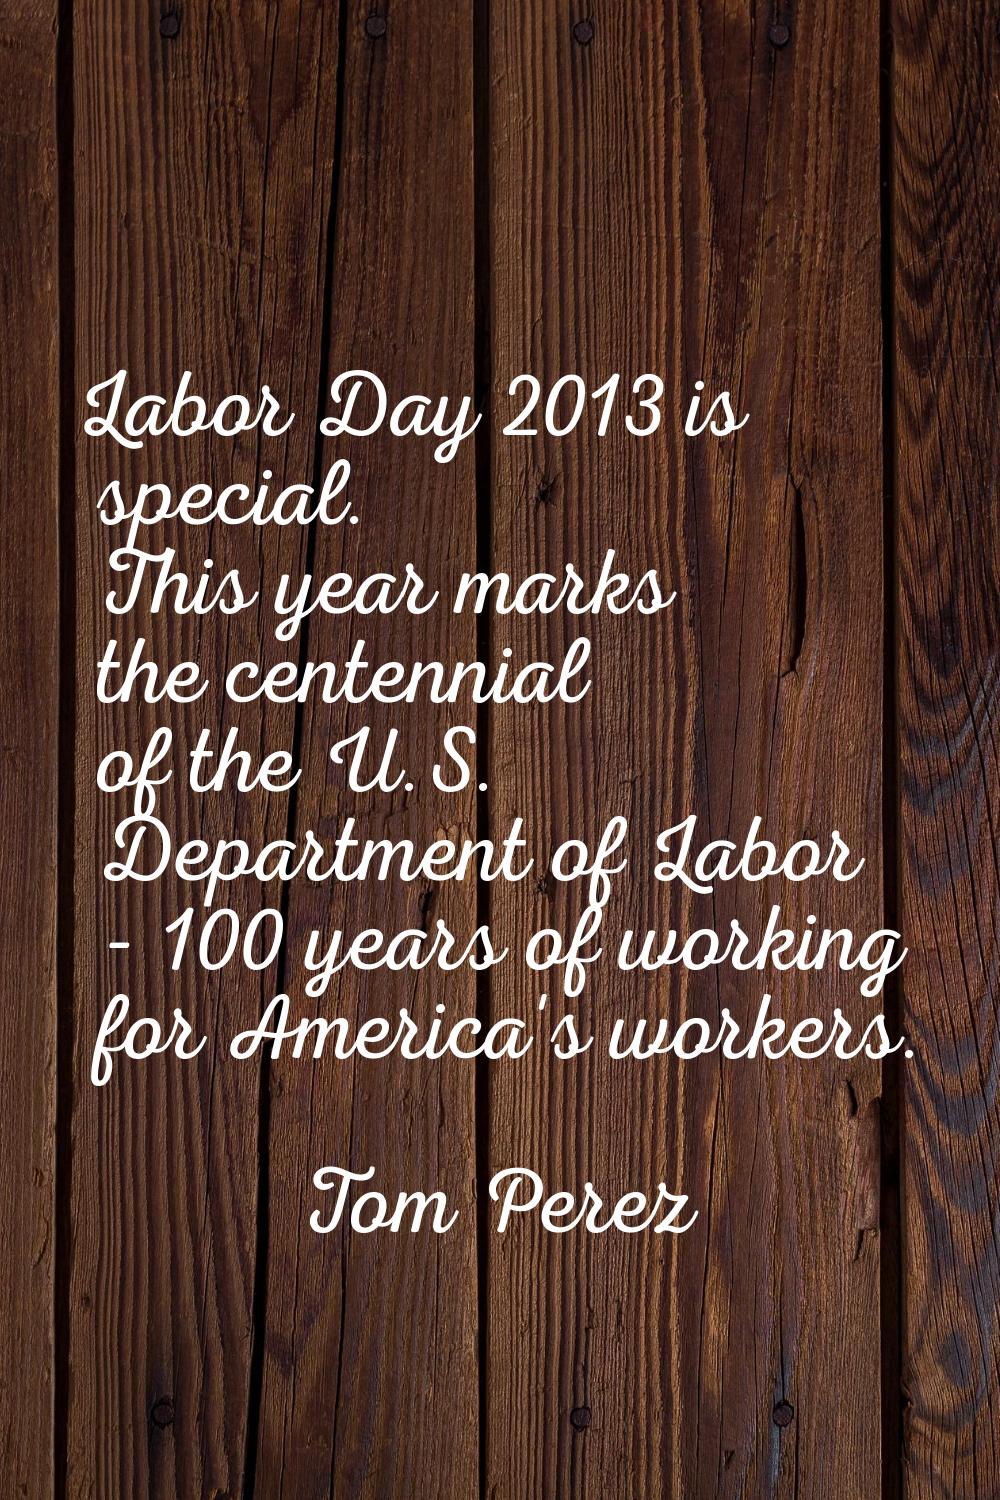 Labor Day 2013 is special. This year marks the centennial of the U.S. Department of Labor - 100 yea